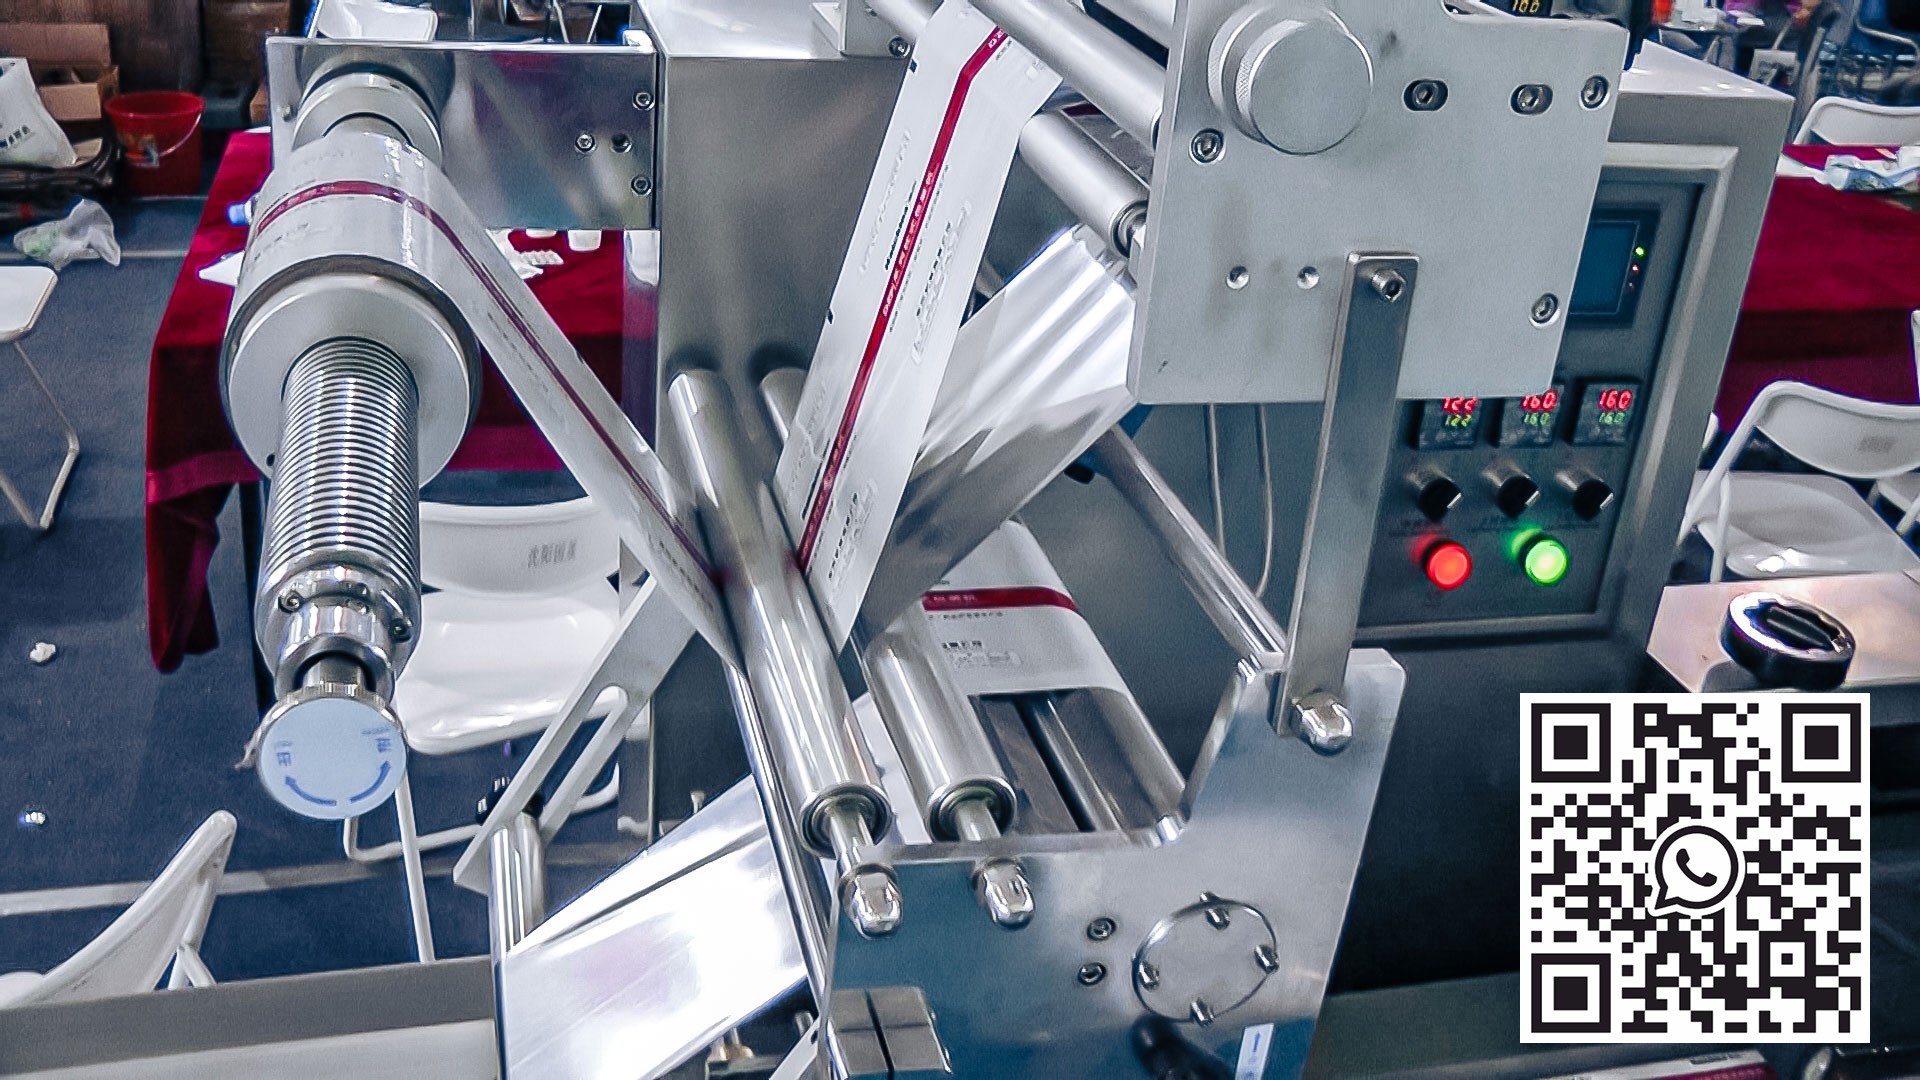 Automatic flopack packaging equipment in pharmaceutical production